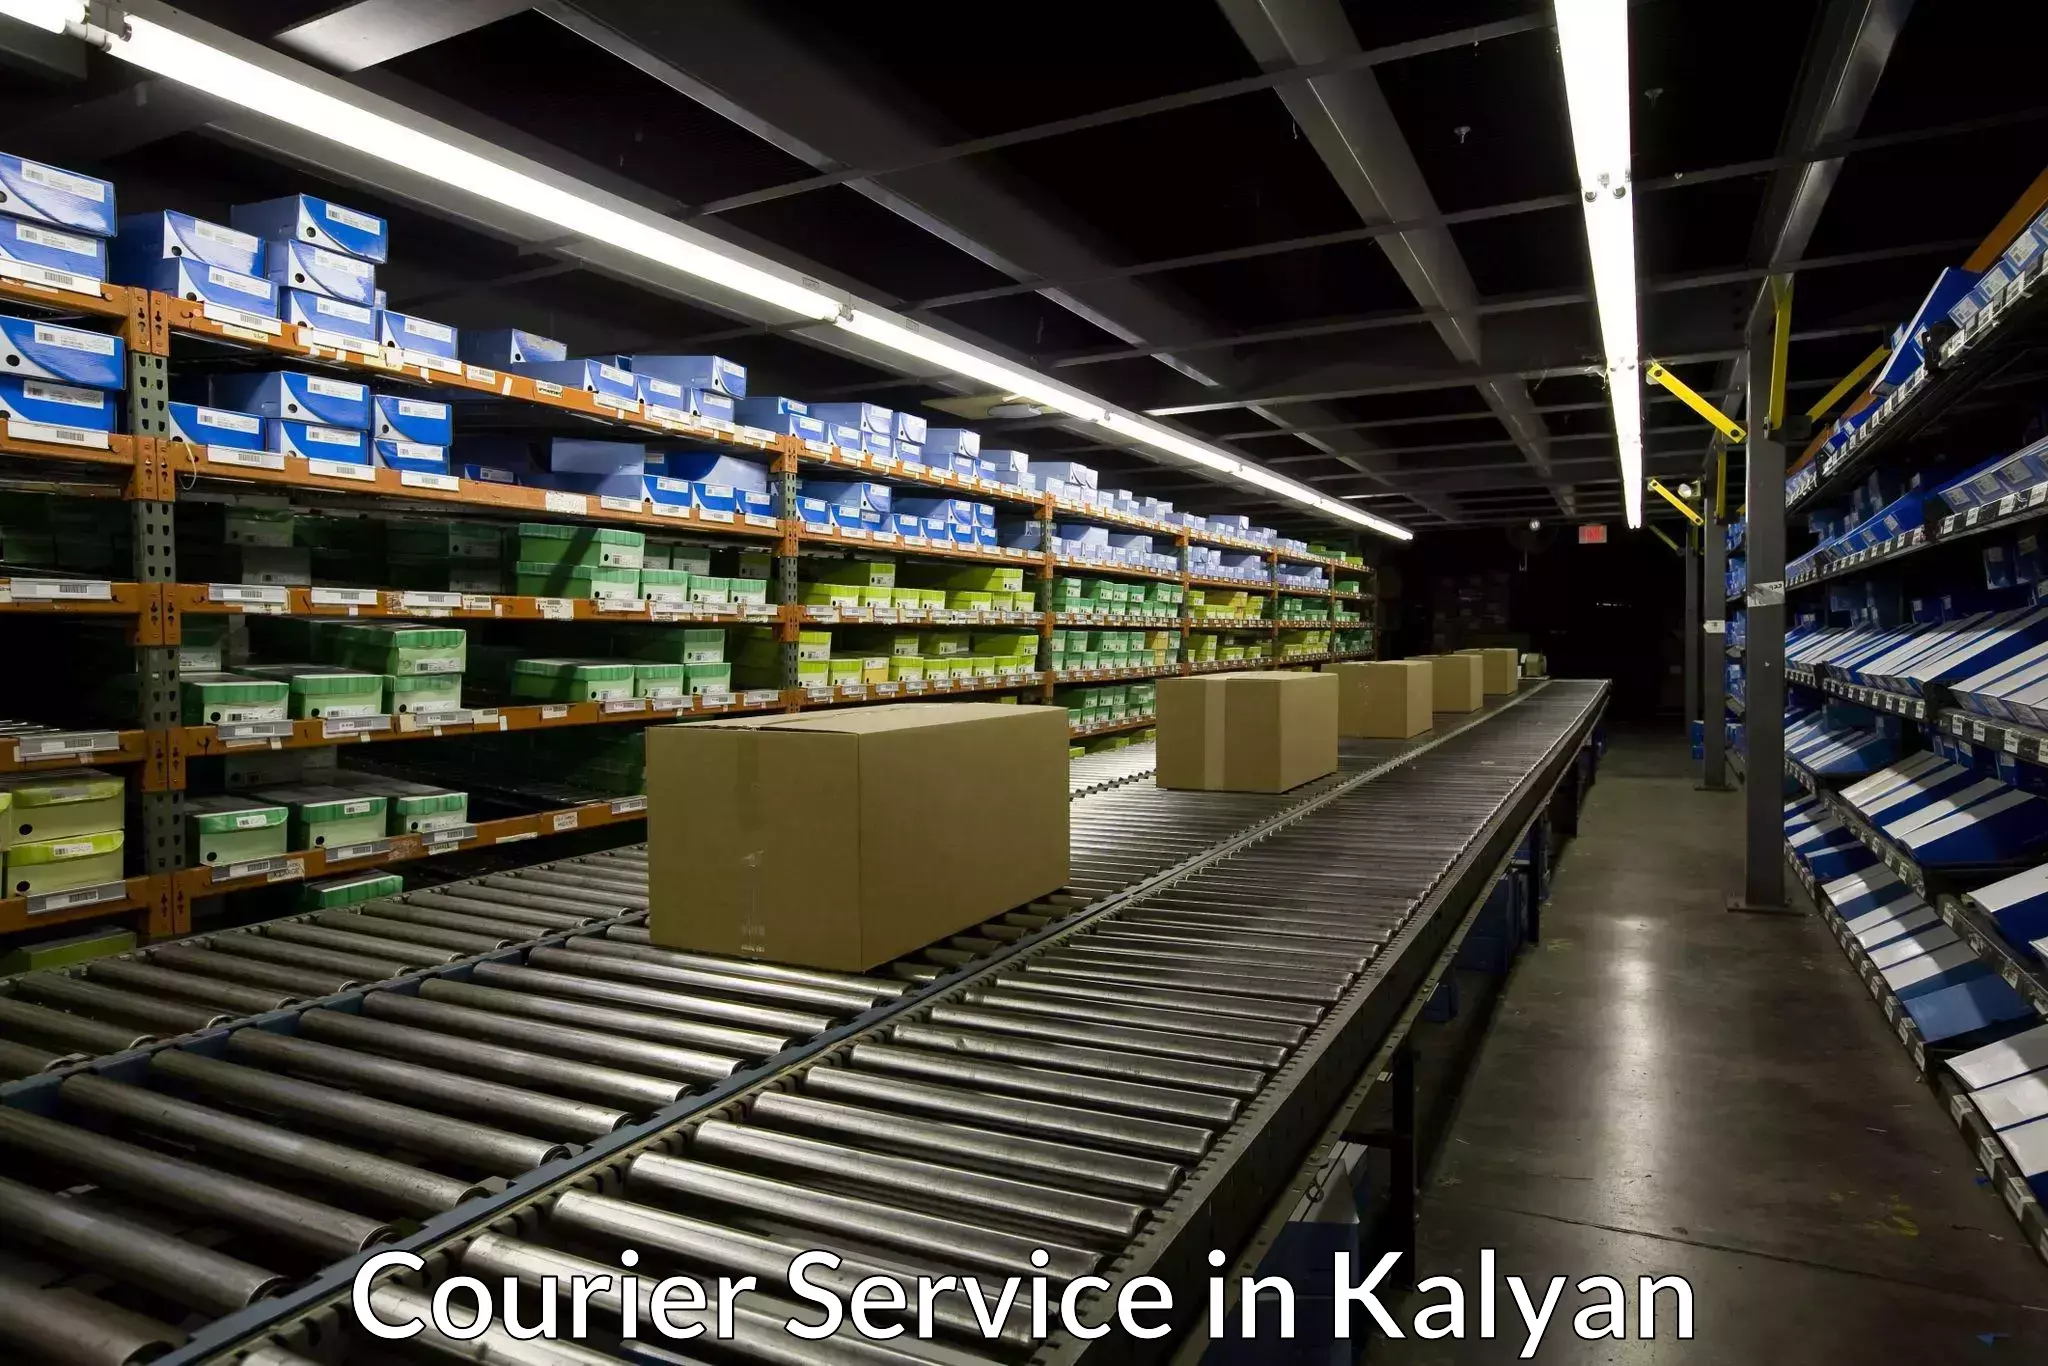 State-of-the-art courier technology in Kalyan